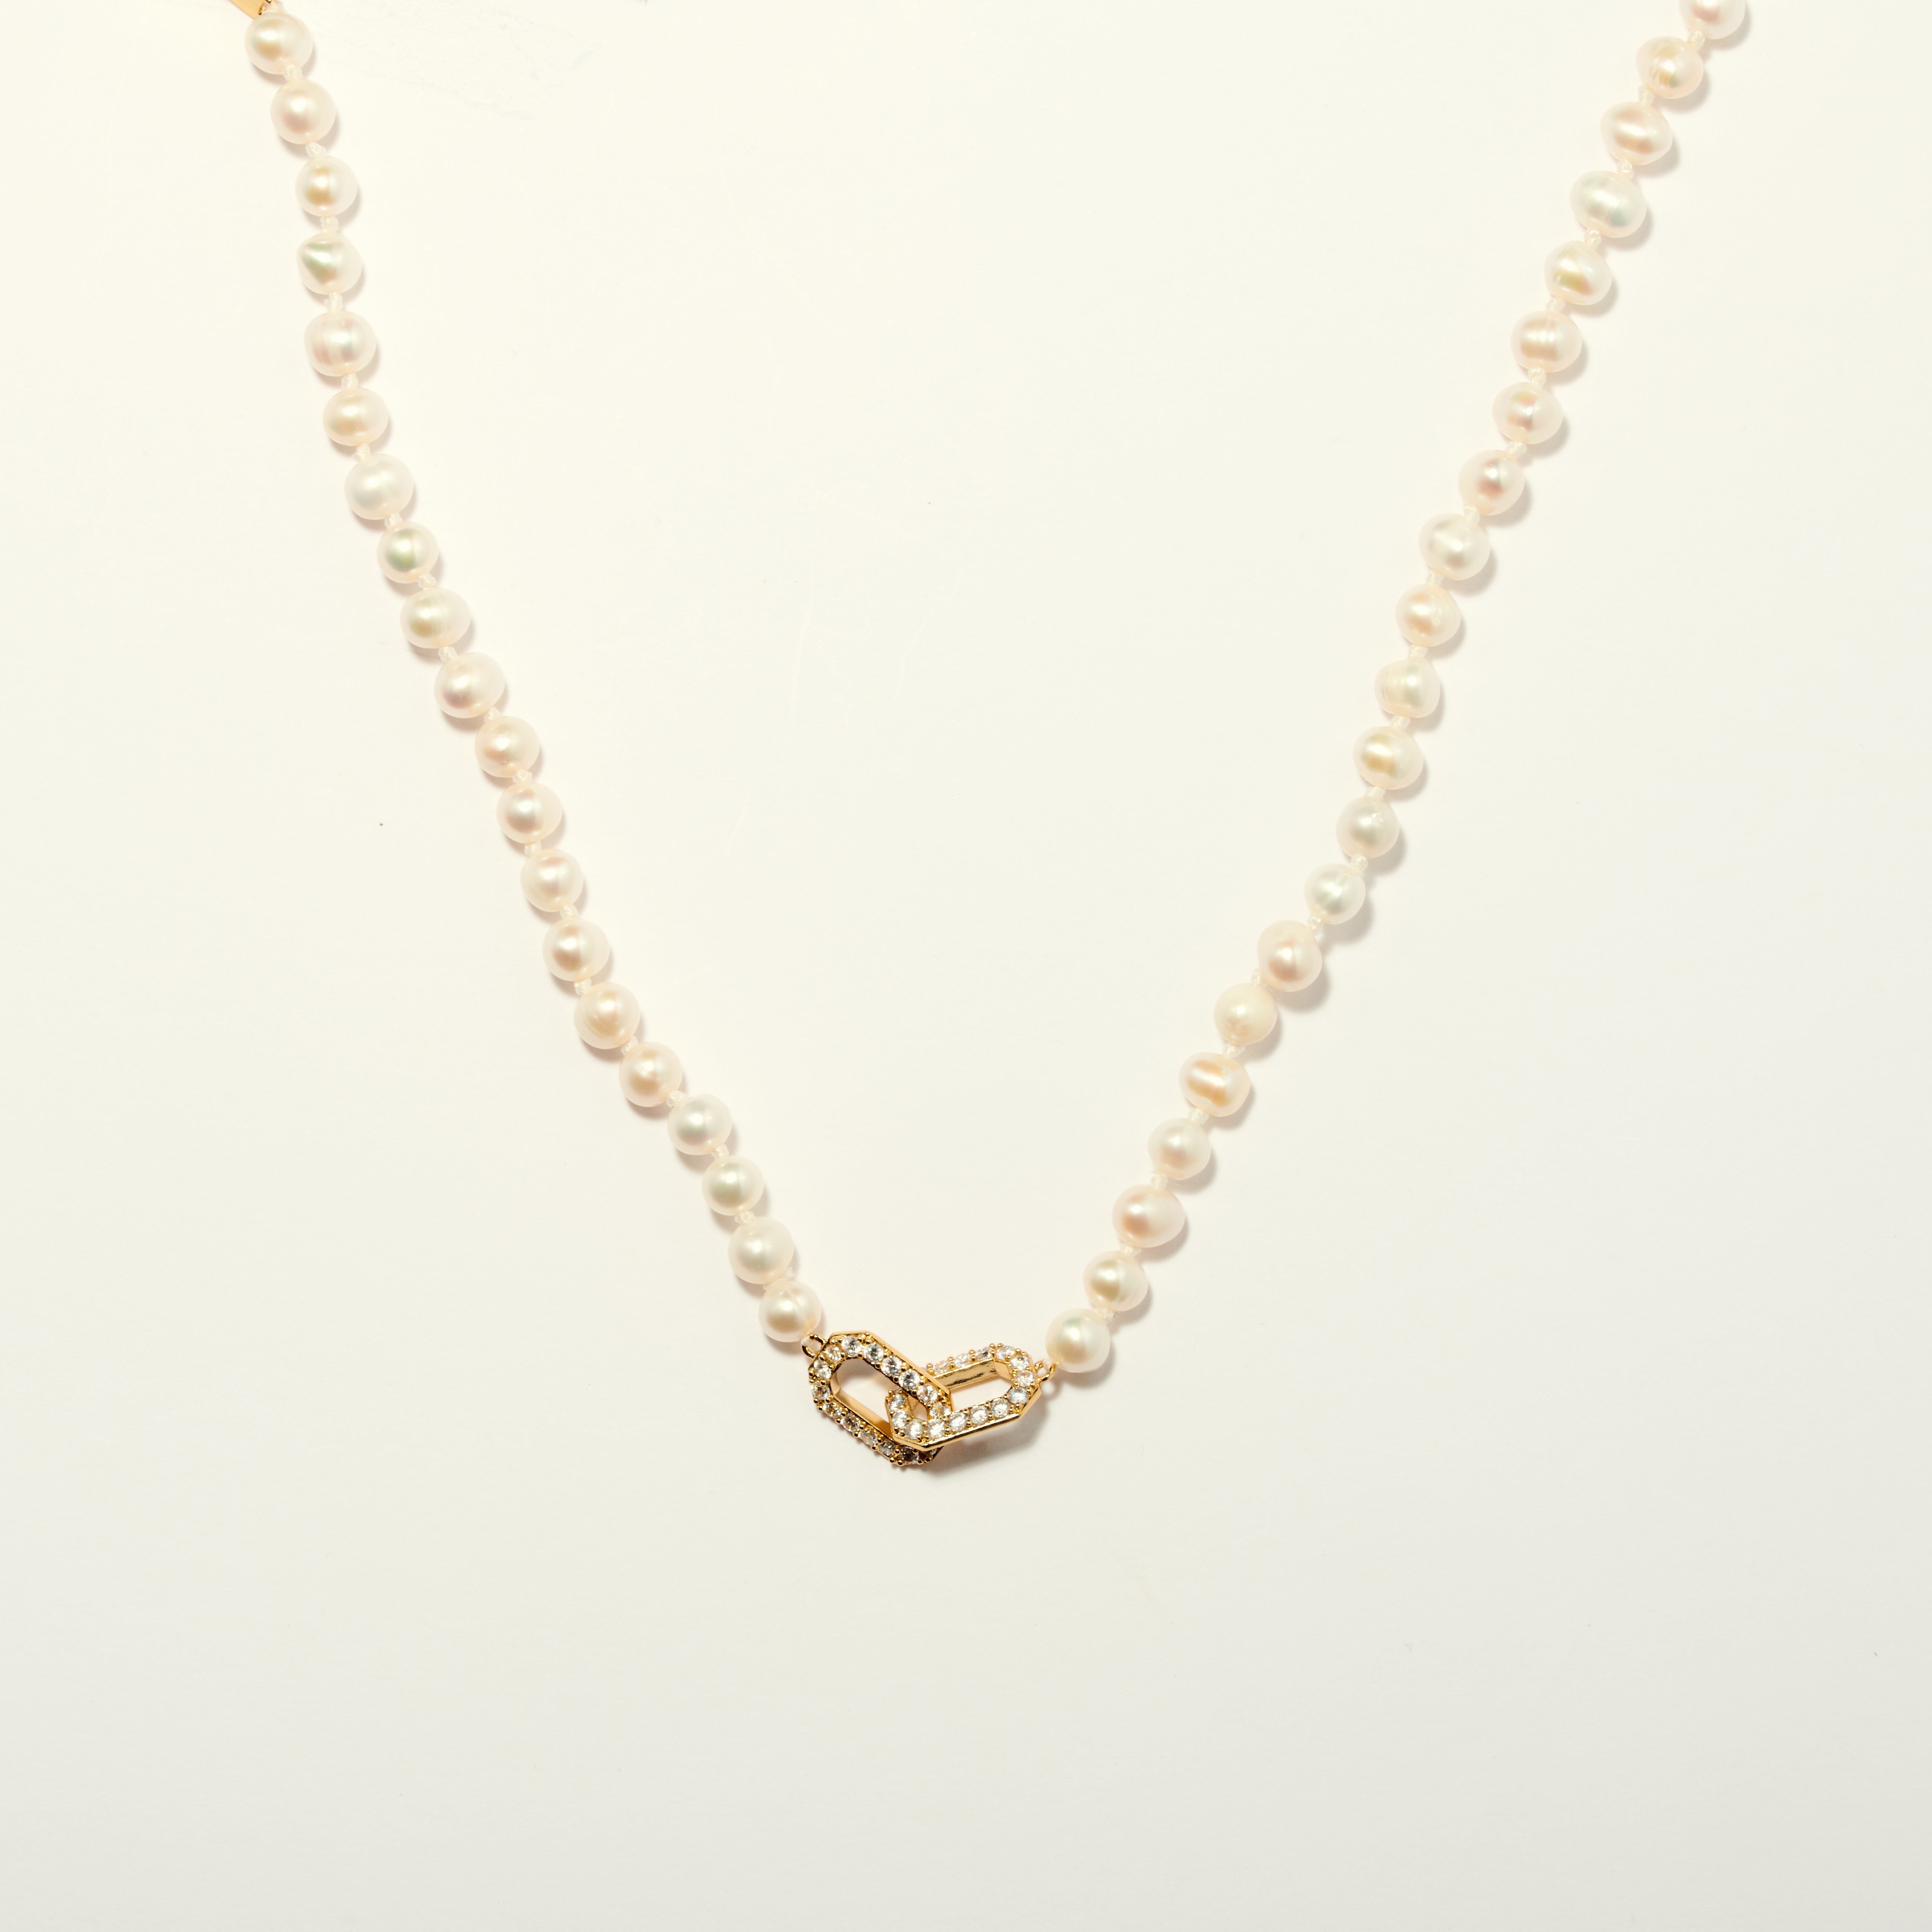 COMMITMENT PAVE PEARL GOLD NECKLACE